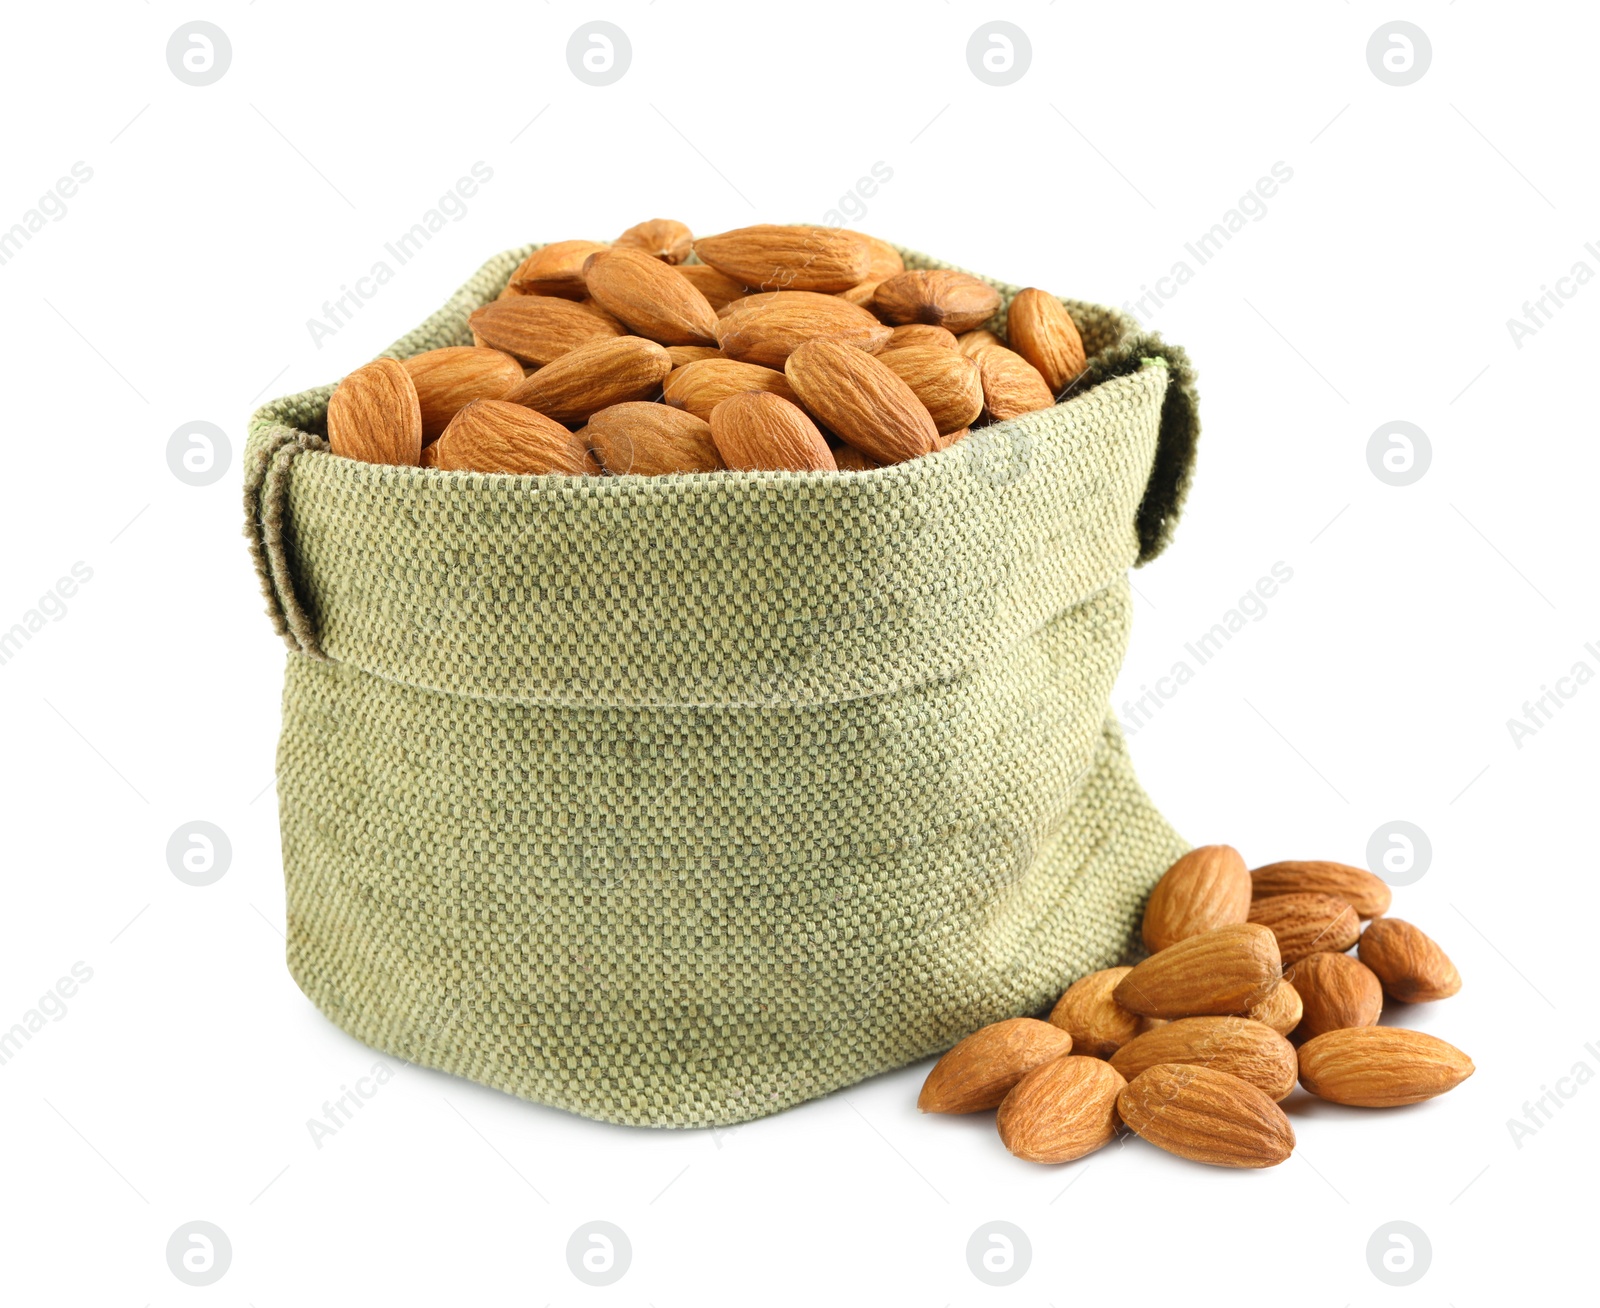 Photo of Sack and organic almond nuts on white background. Healthy snack